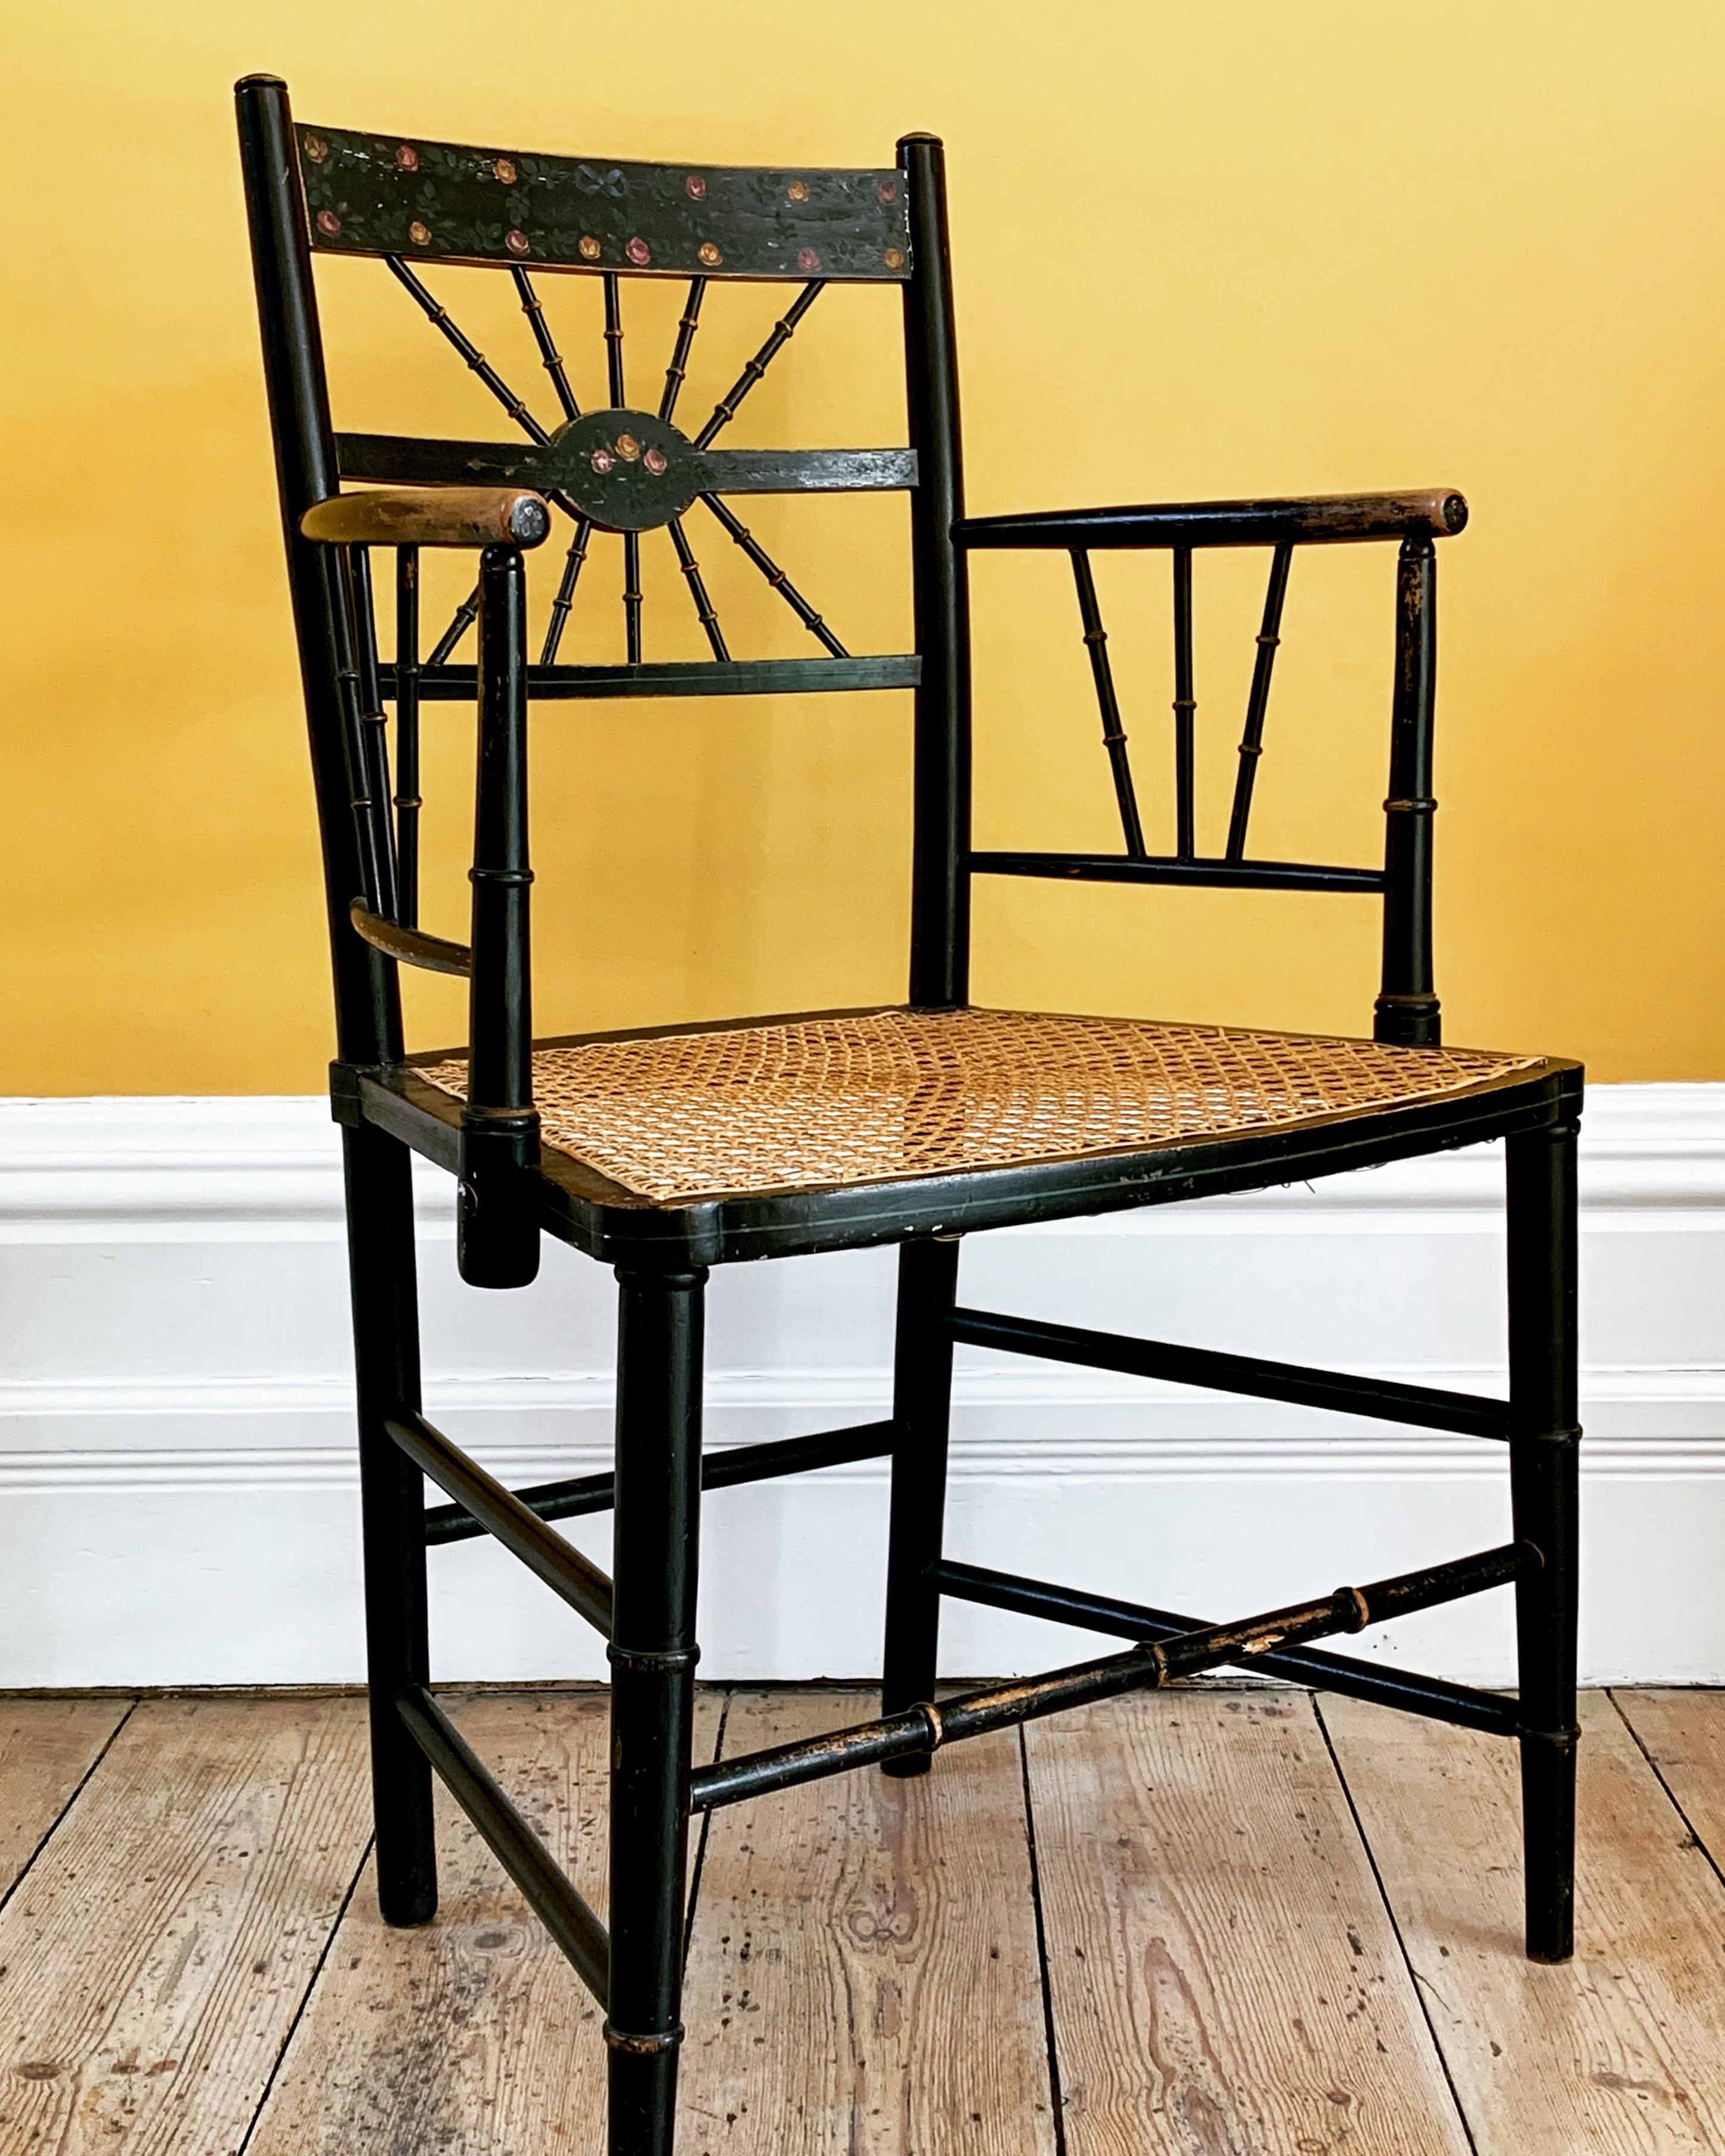 Original example Sussex chair with unusual design back with original painted design with flowers. The cane seat is undamaged.